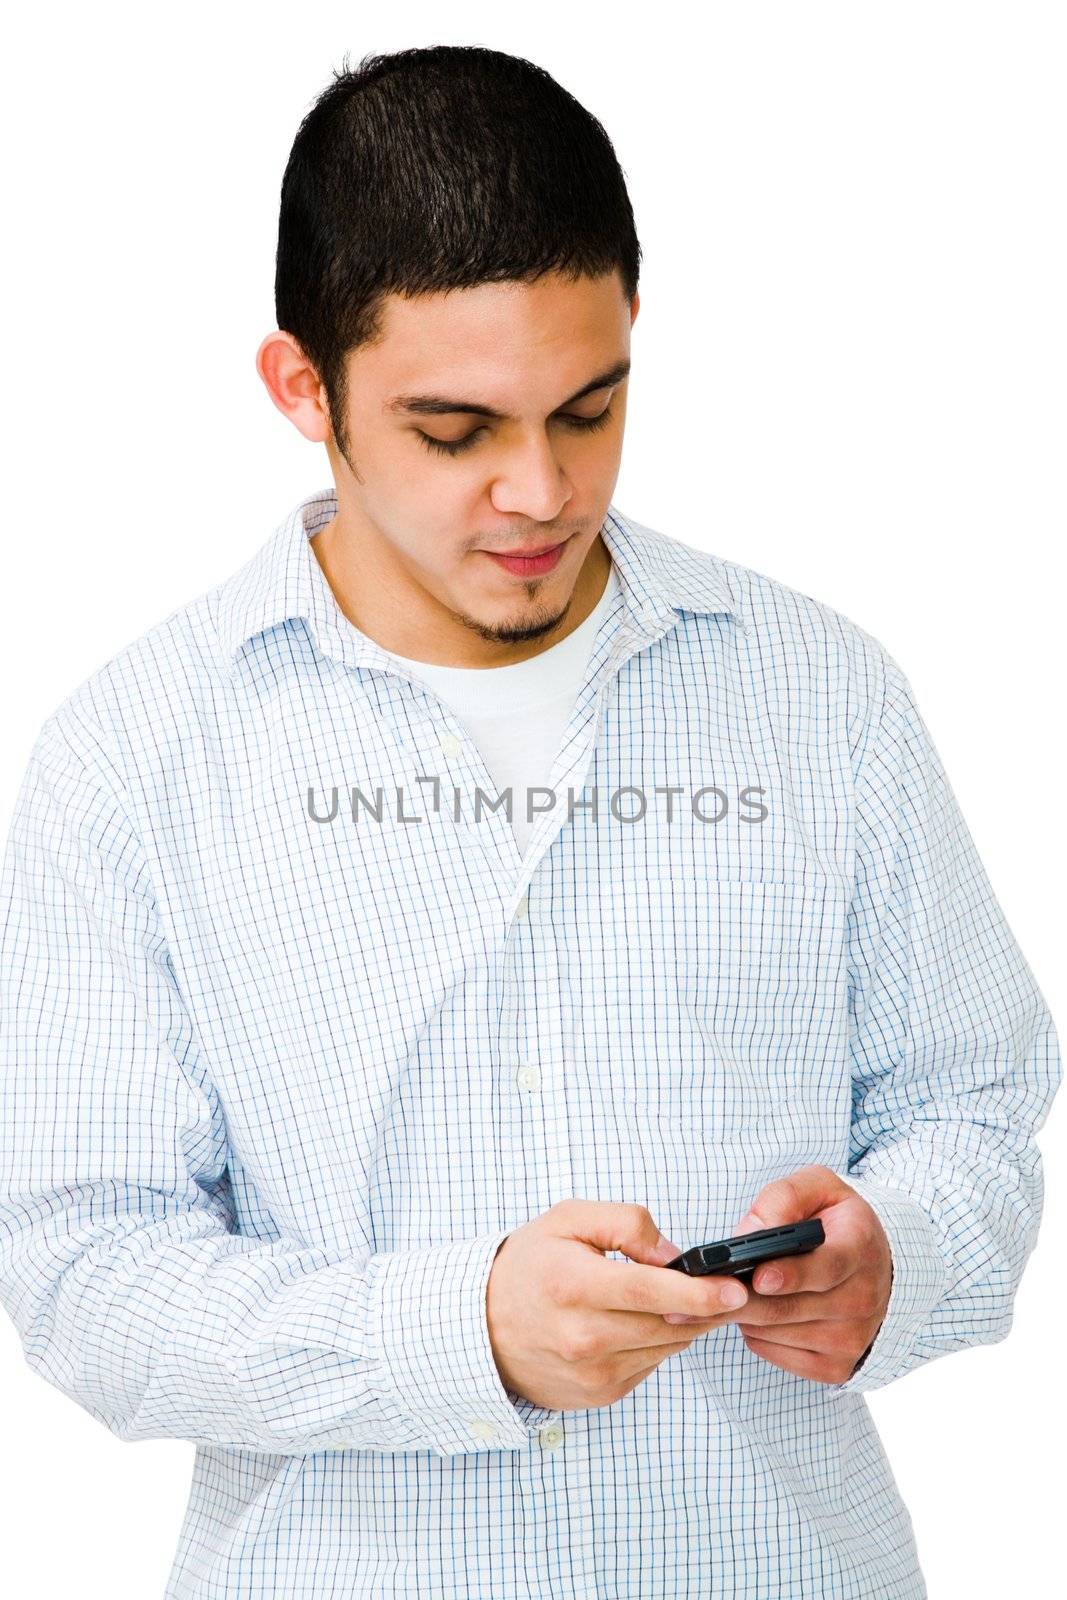 Man using a mobile phone isolated over white